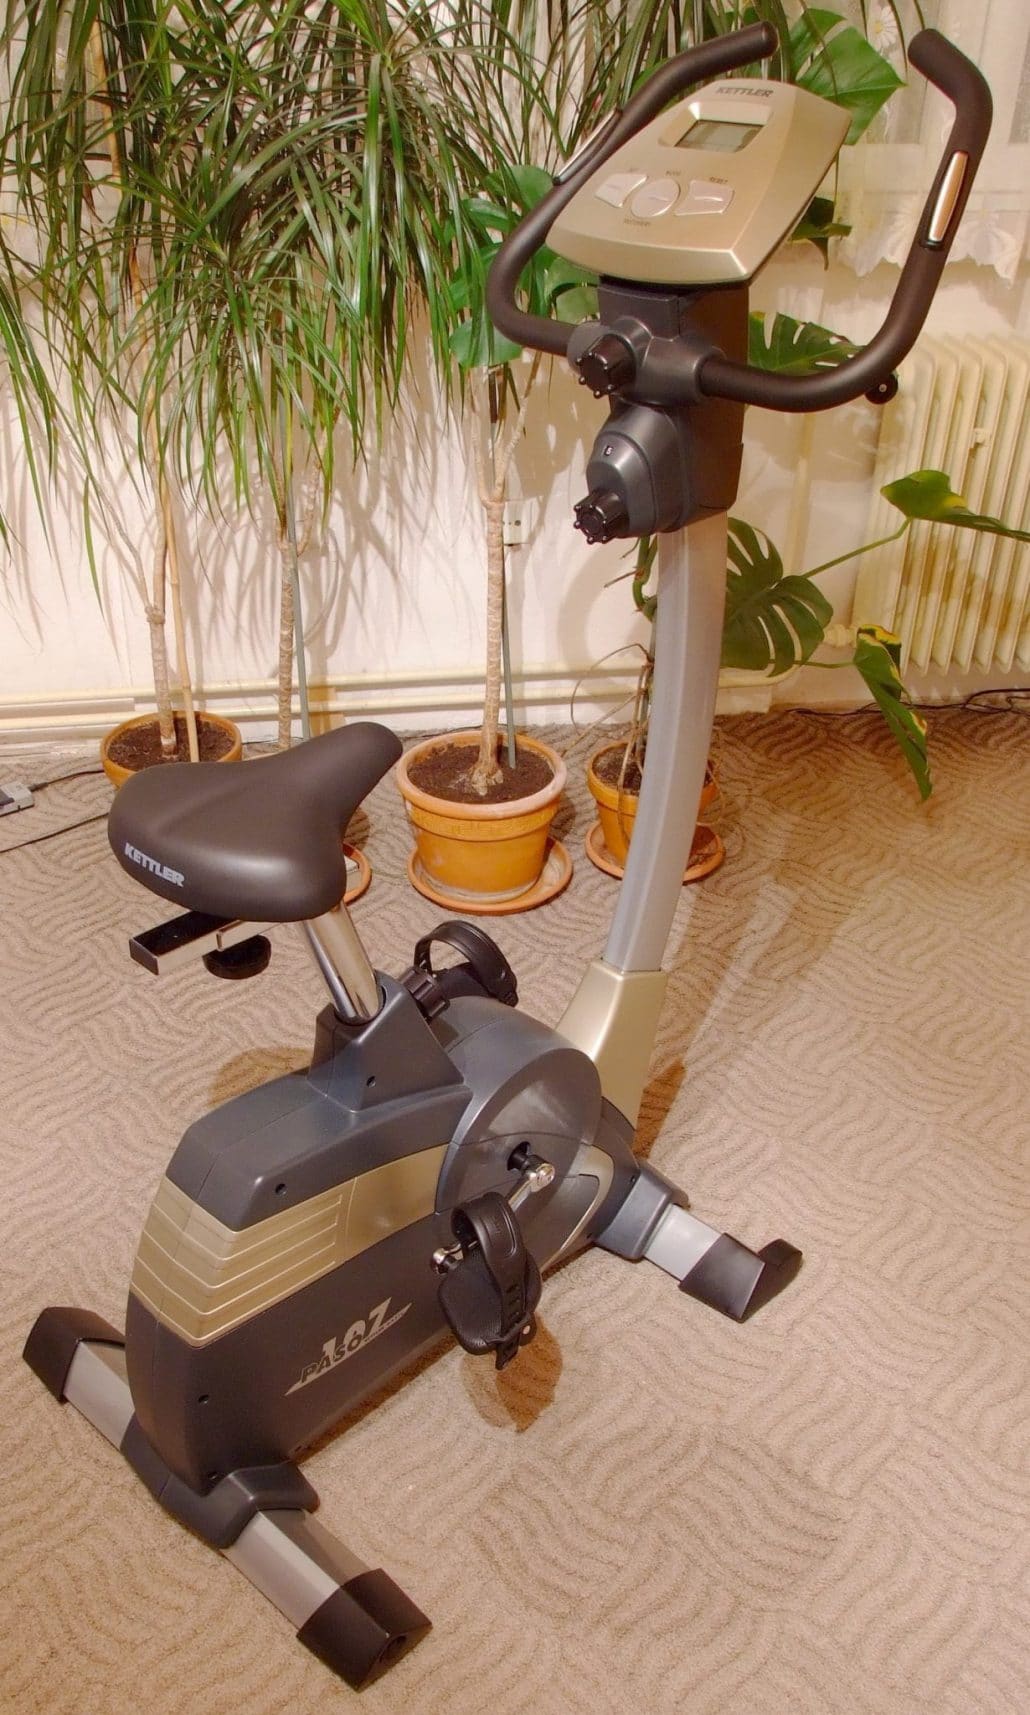 What to Do About Knee Pain From the Stationary Bike ...